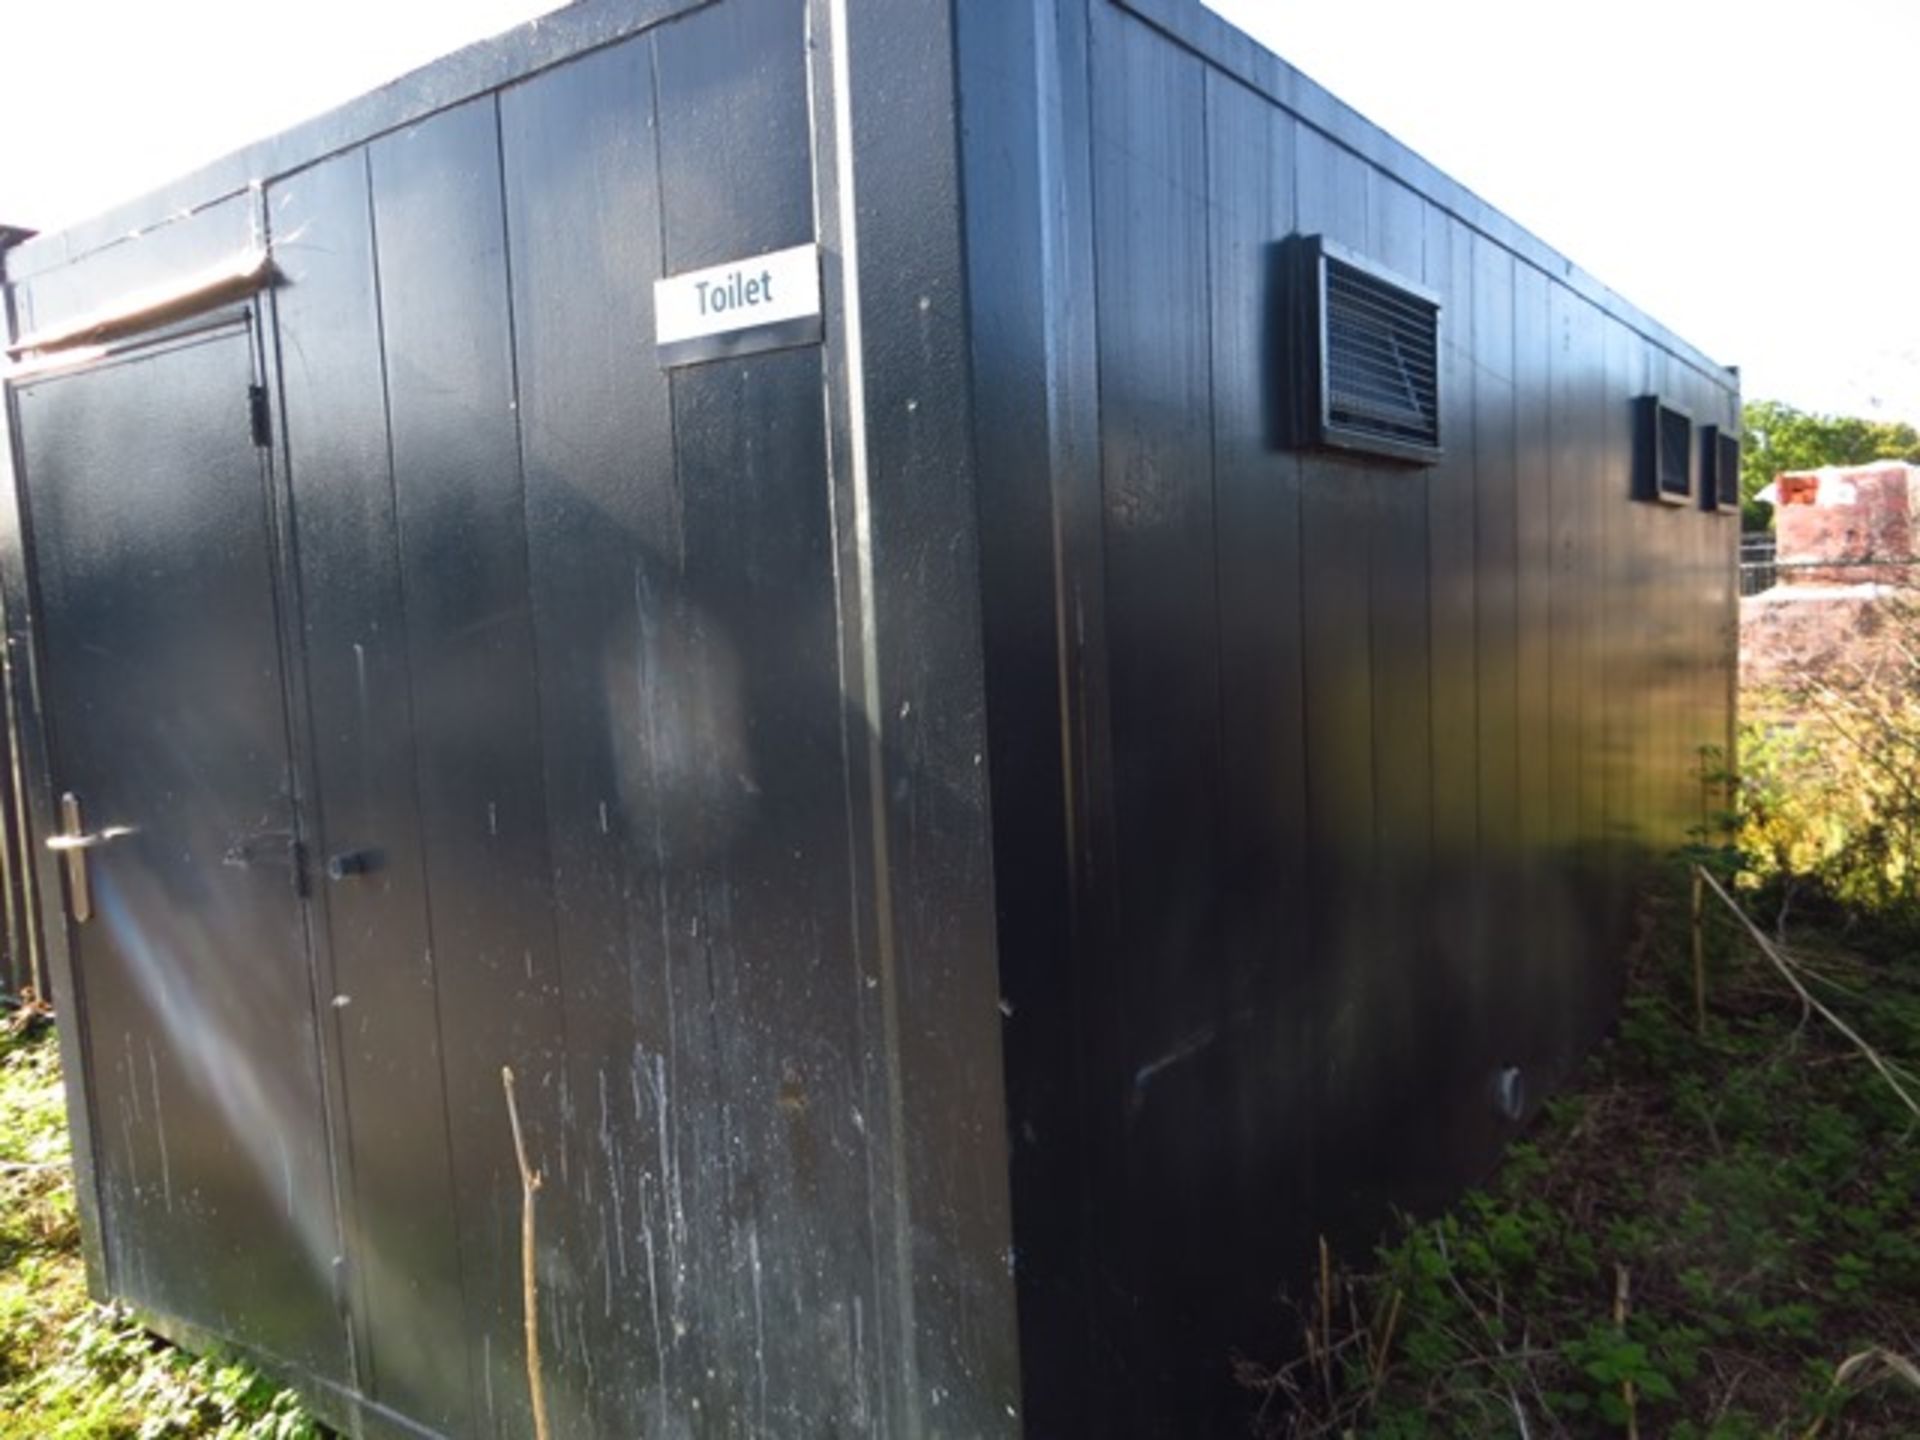 21' x 9' Steel Container Split WC 4 Cubicles & 4 Urinals c/w Separate Ladies Toilet Cubicle - Image 2 of 4